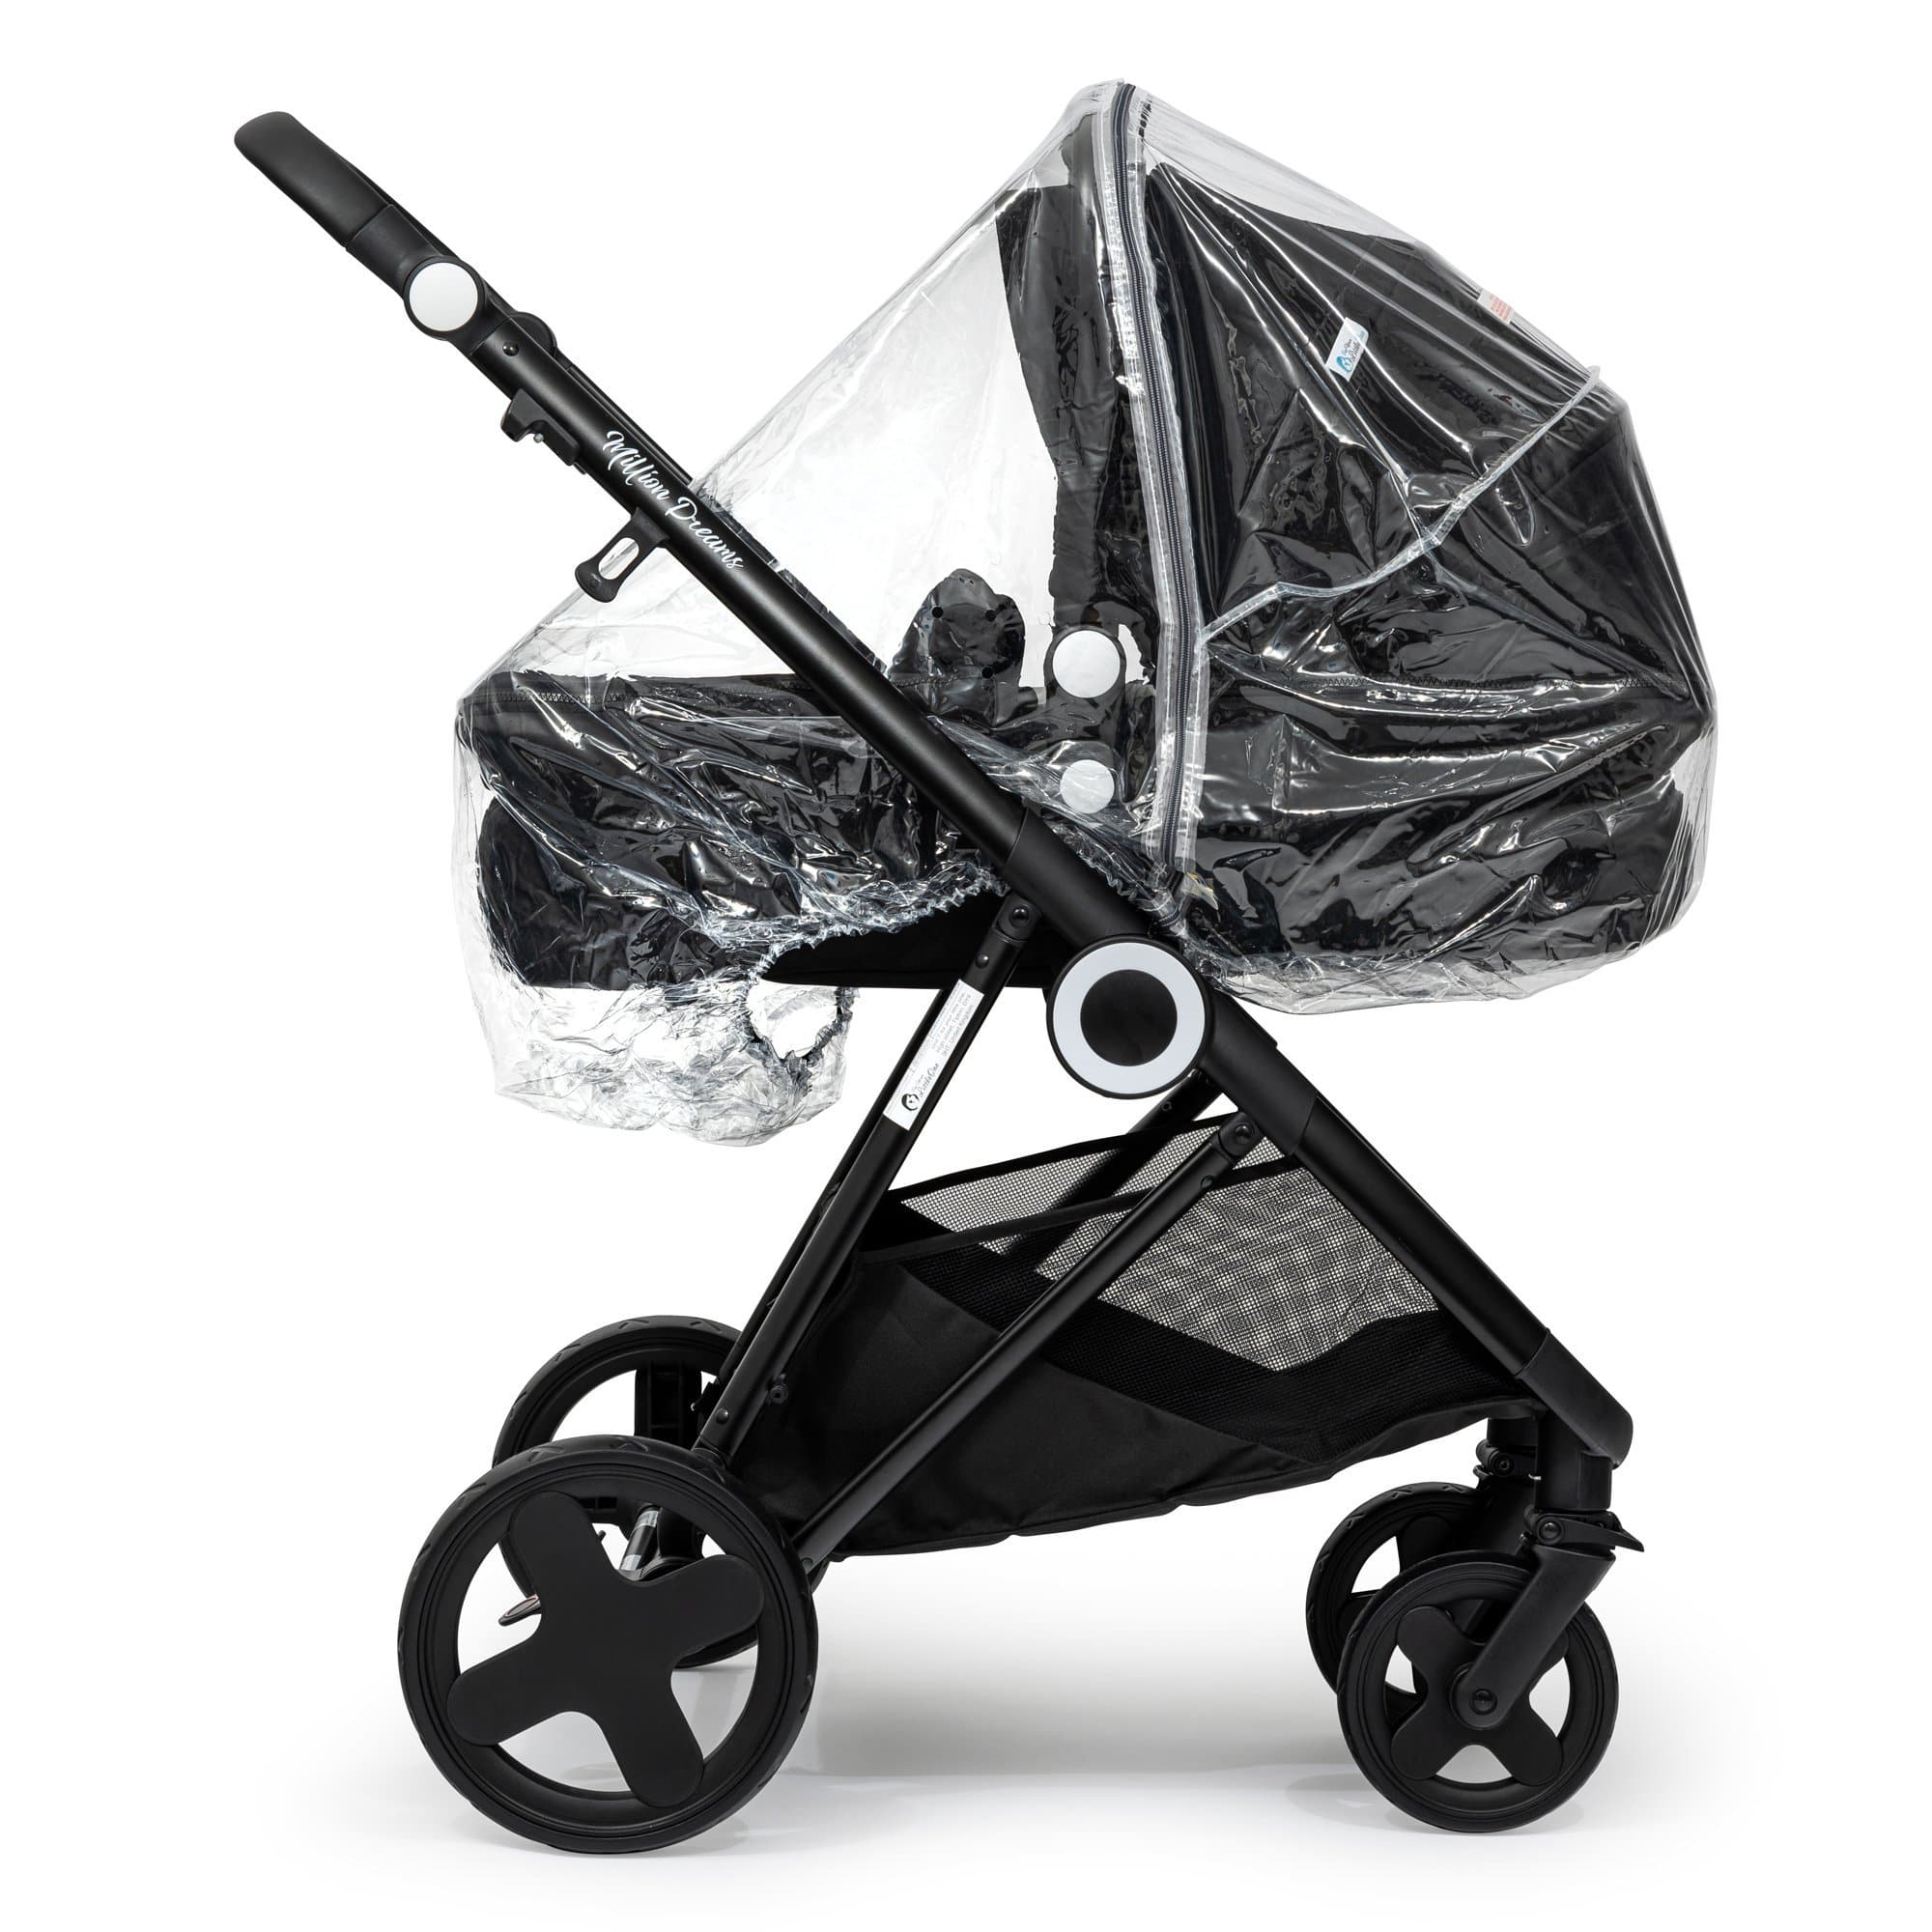 2 in 1 Rain Cover Compatible with Emmaljunga - Fits All Models - For Your Little One